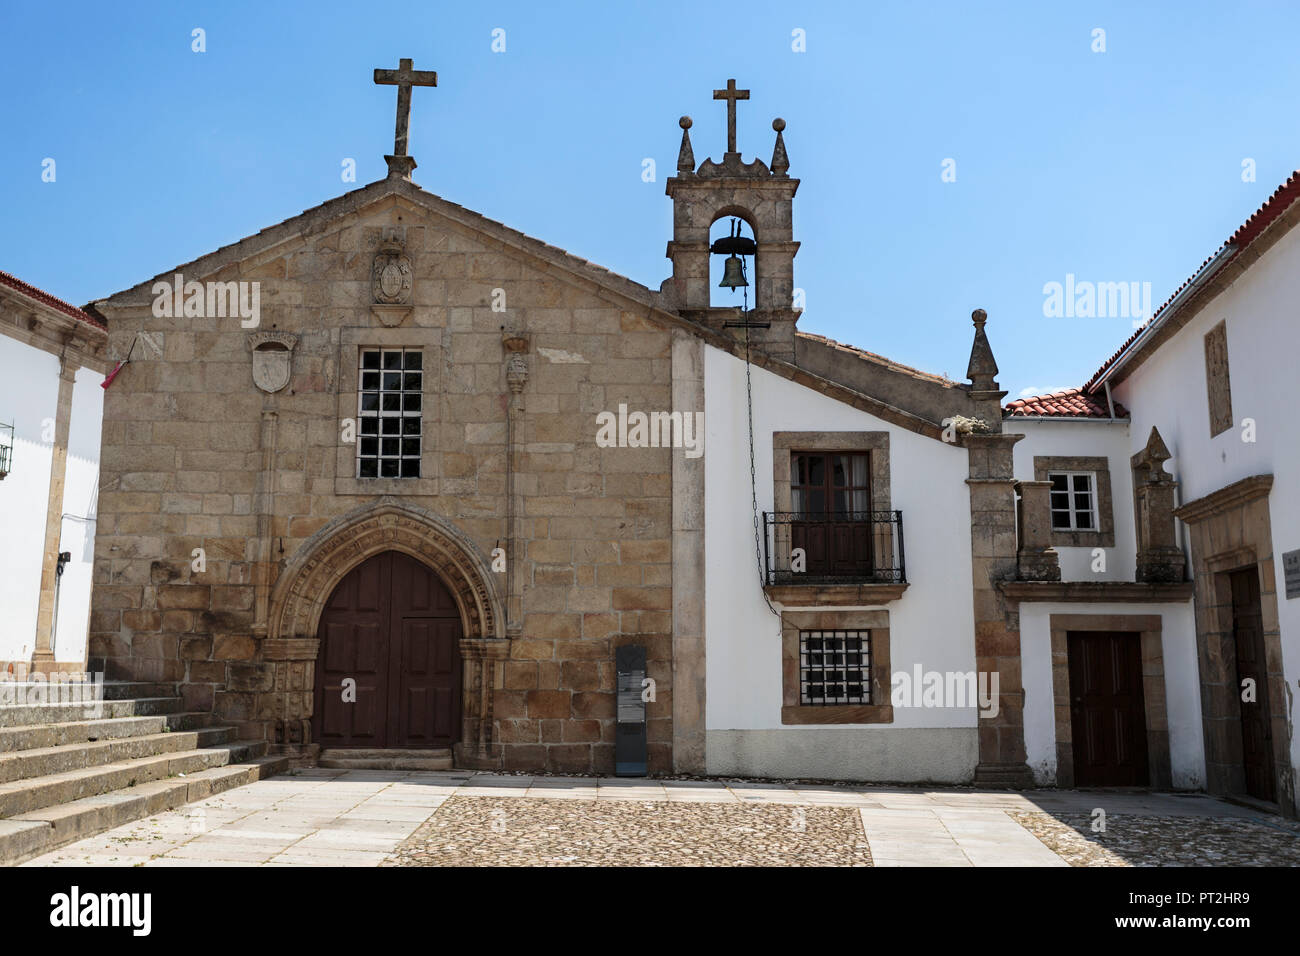 Facade of the Church of Mercy, built in the early years of the 16th century with Gothic Manueline architectural elements, in Pinhel, Portugal Stock Photo